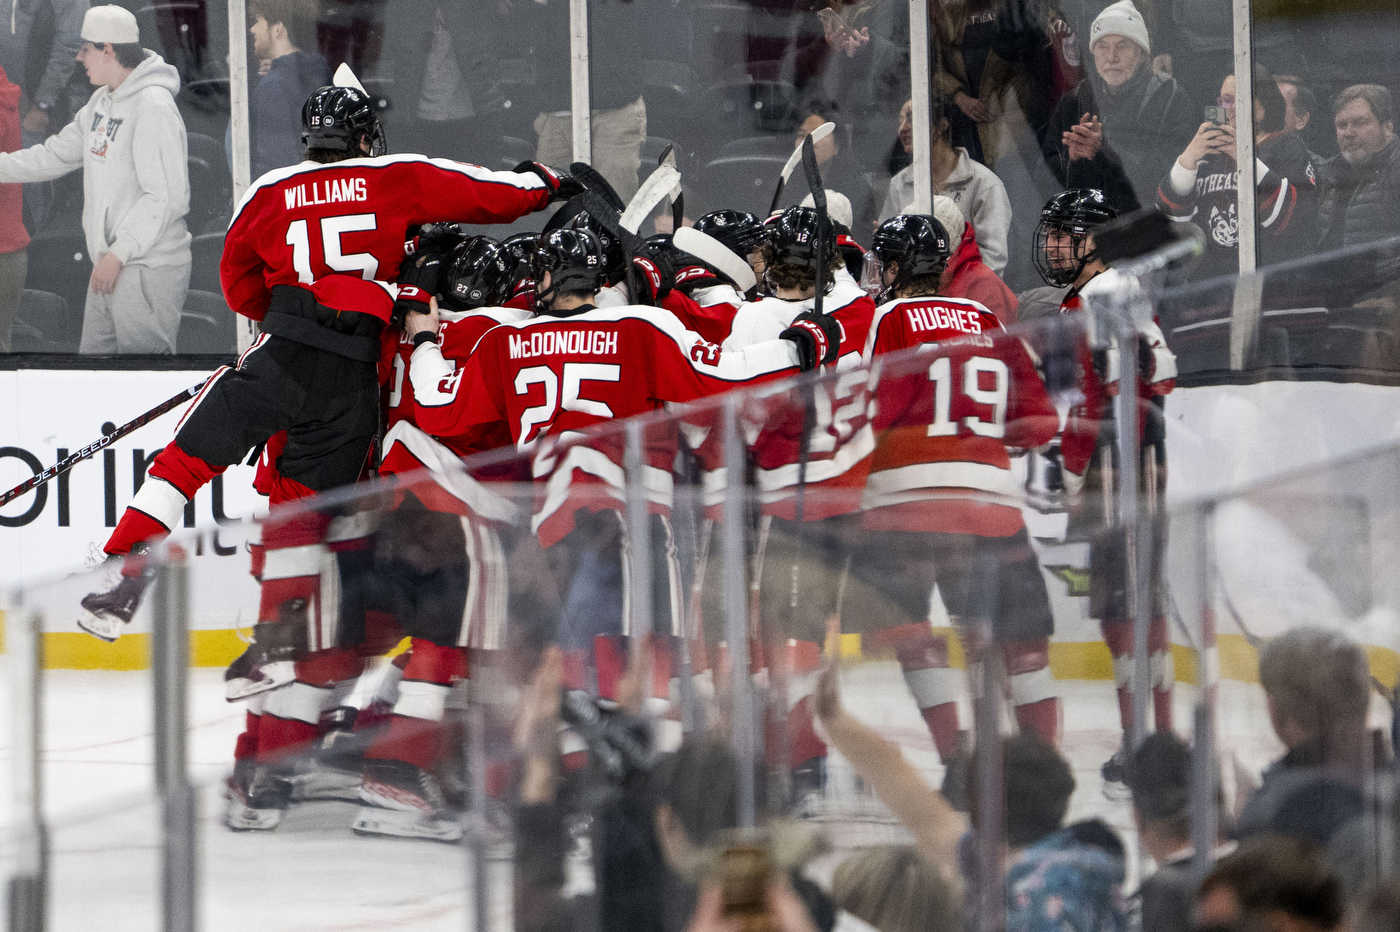 northeastern hockey players cheering after scoring a goal